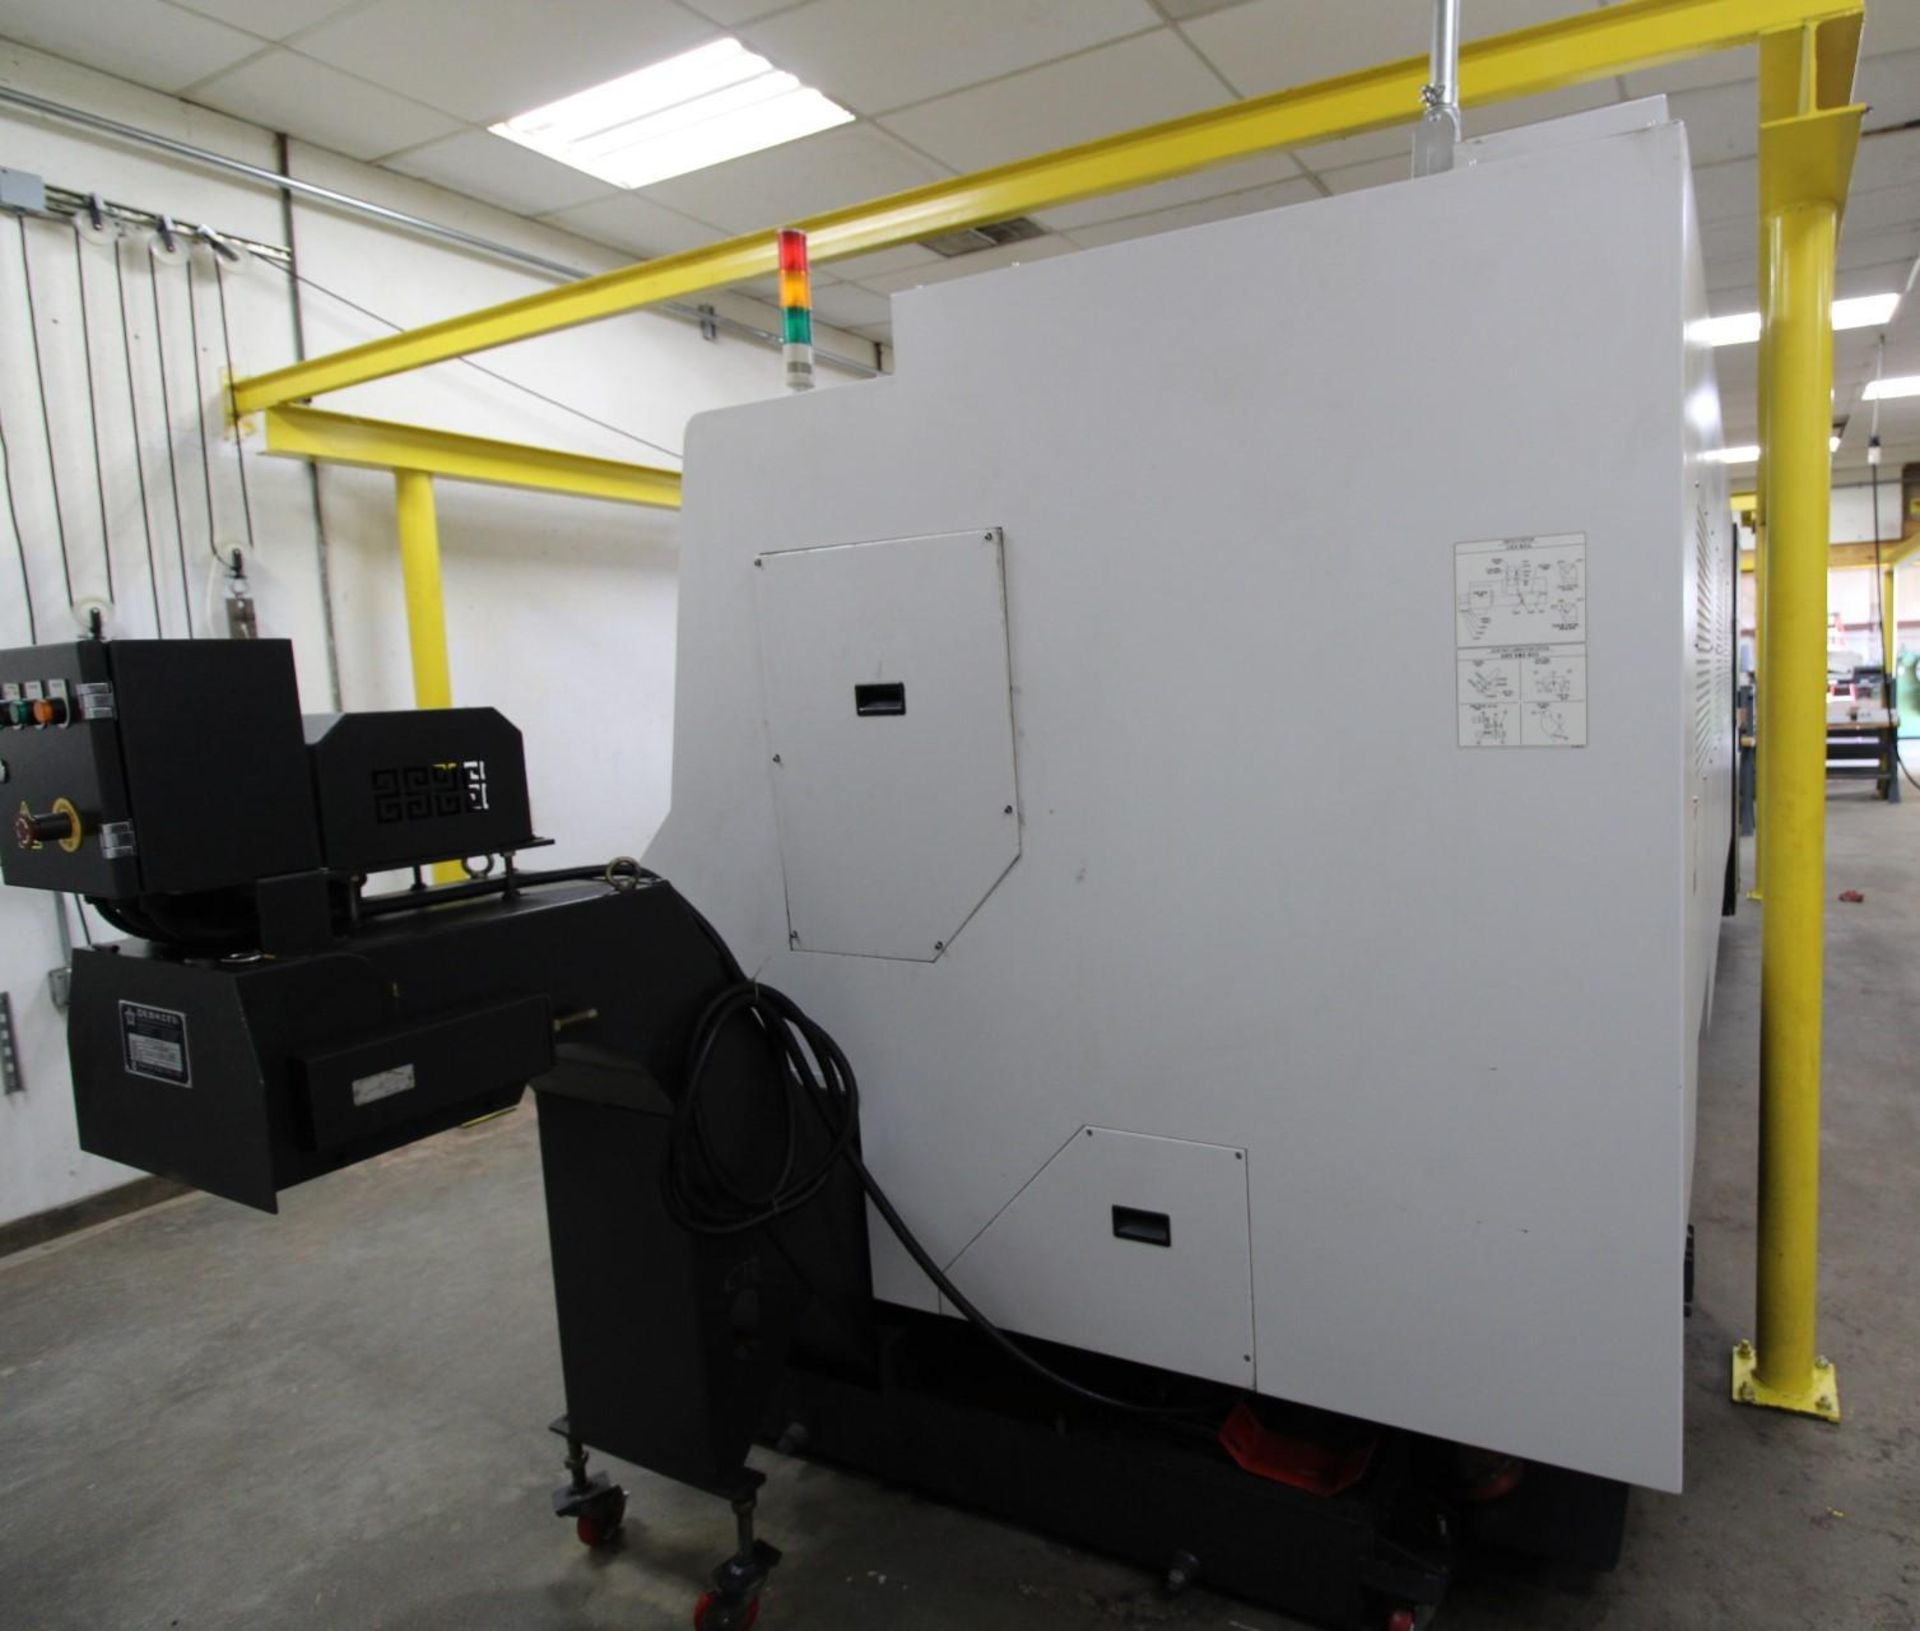 MULTI AXIS CNC MILLING & TURNING CENTER, SAMSUNG MDL. SL-45MC/3000, new 2014, Fanuc Oi-TD control, - Image 5 of 16